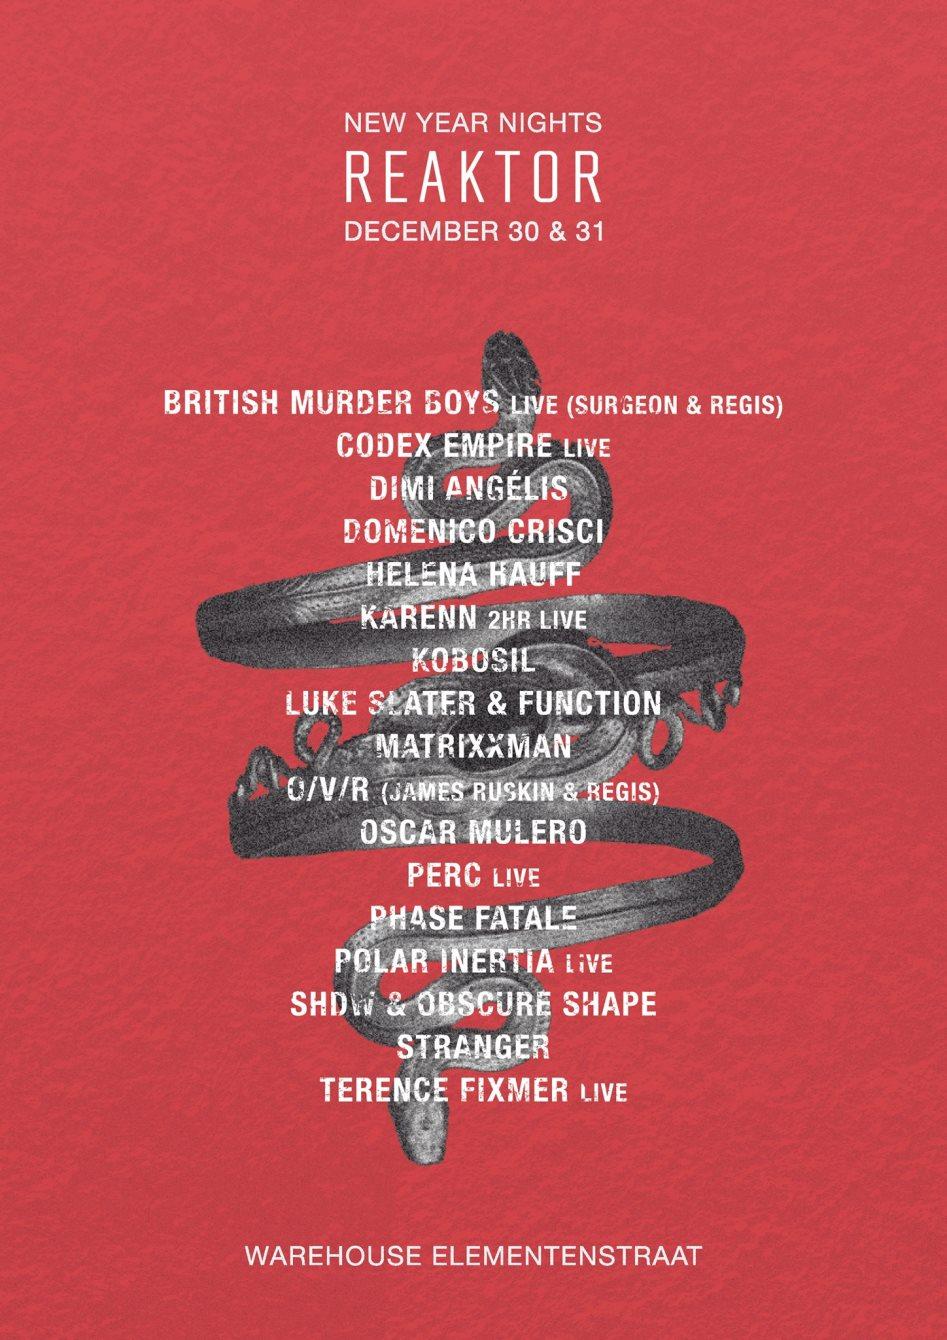 Reaktor New Year Nights - Flyer front